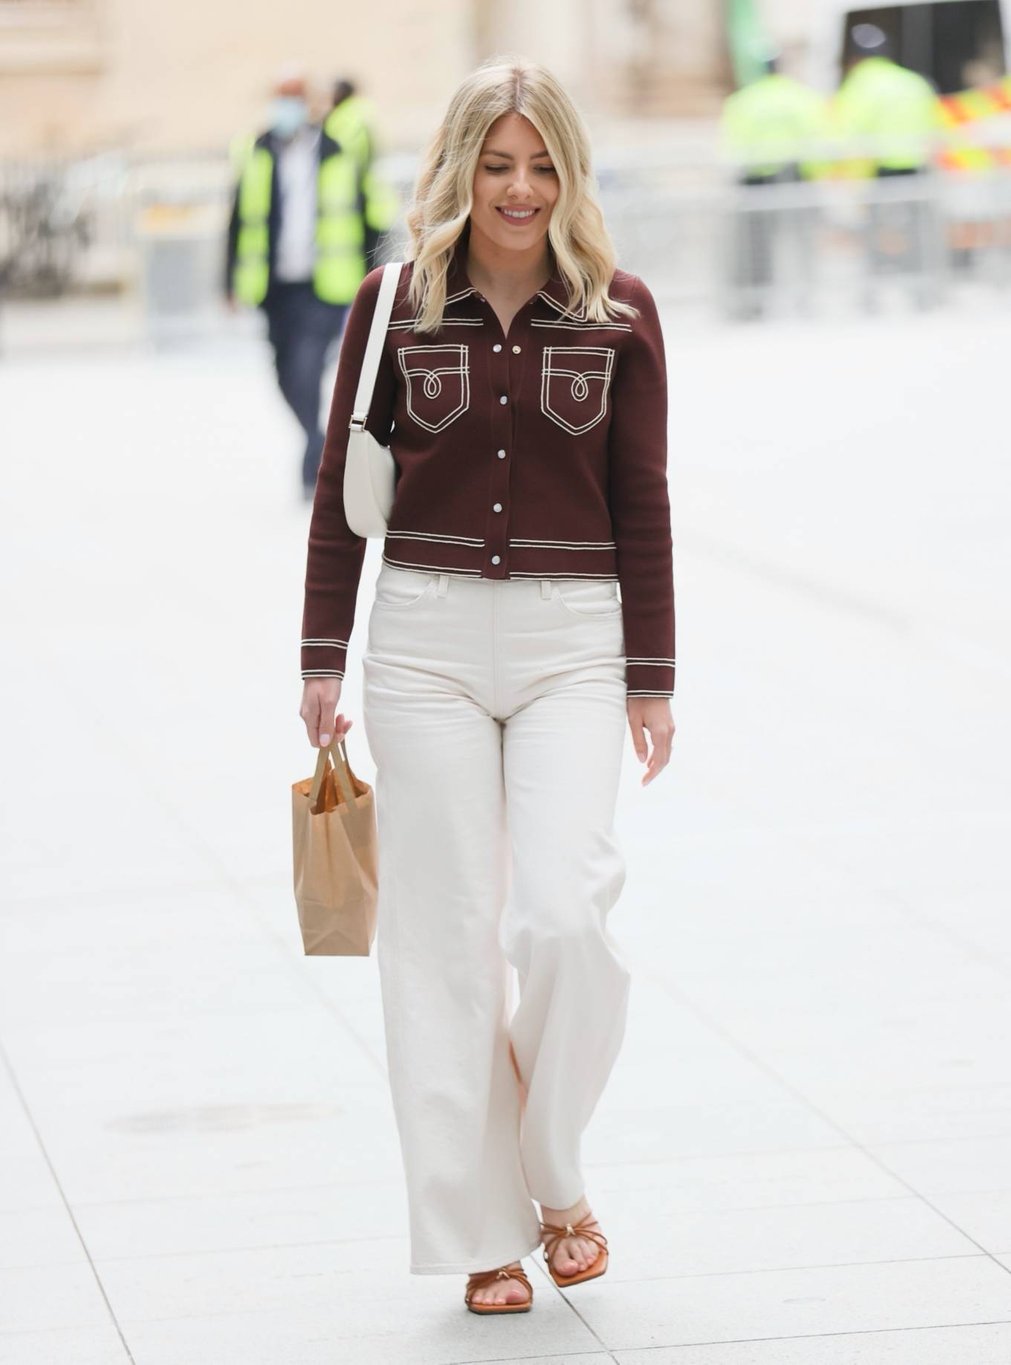 Mollie King 2021 : Mollie King – arrives at the BBC studios in London-04